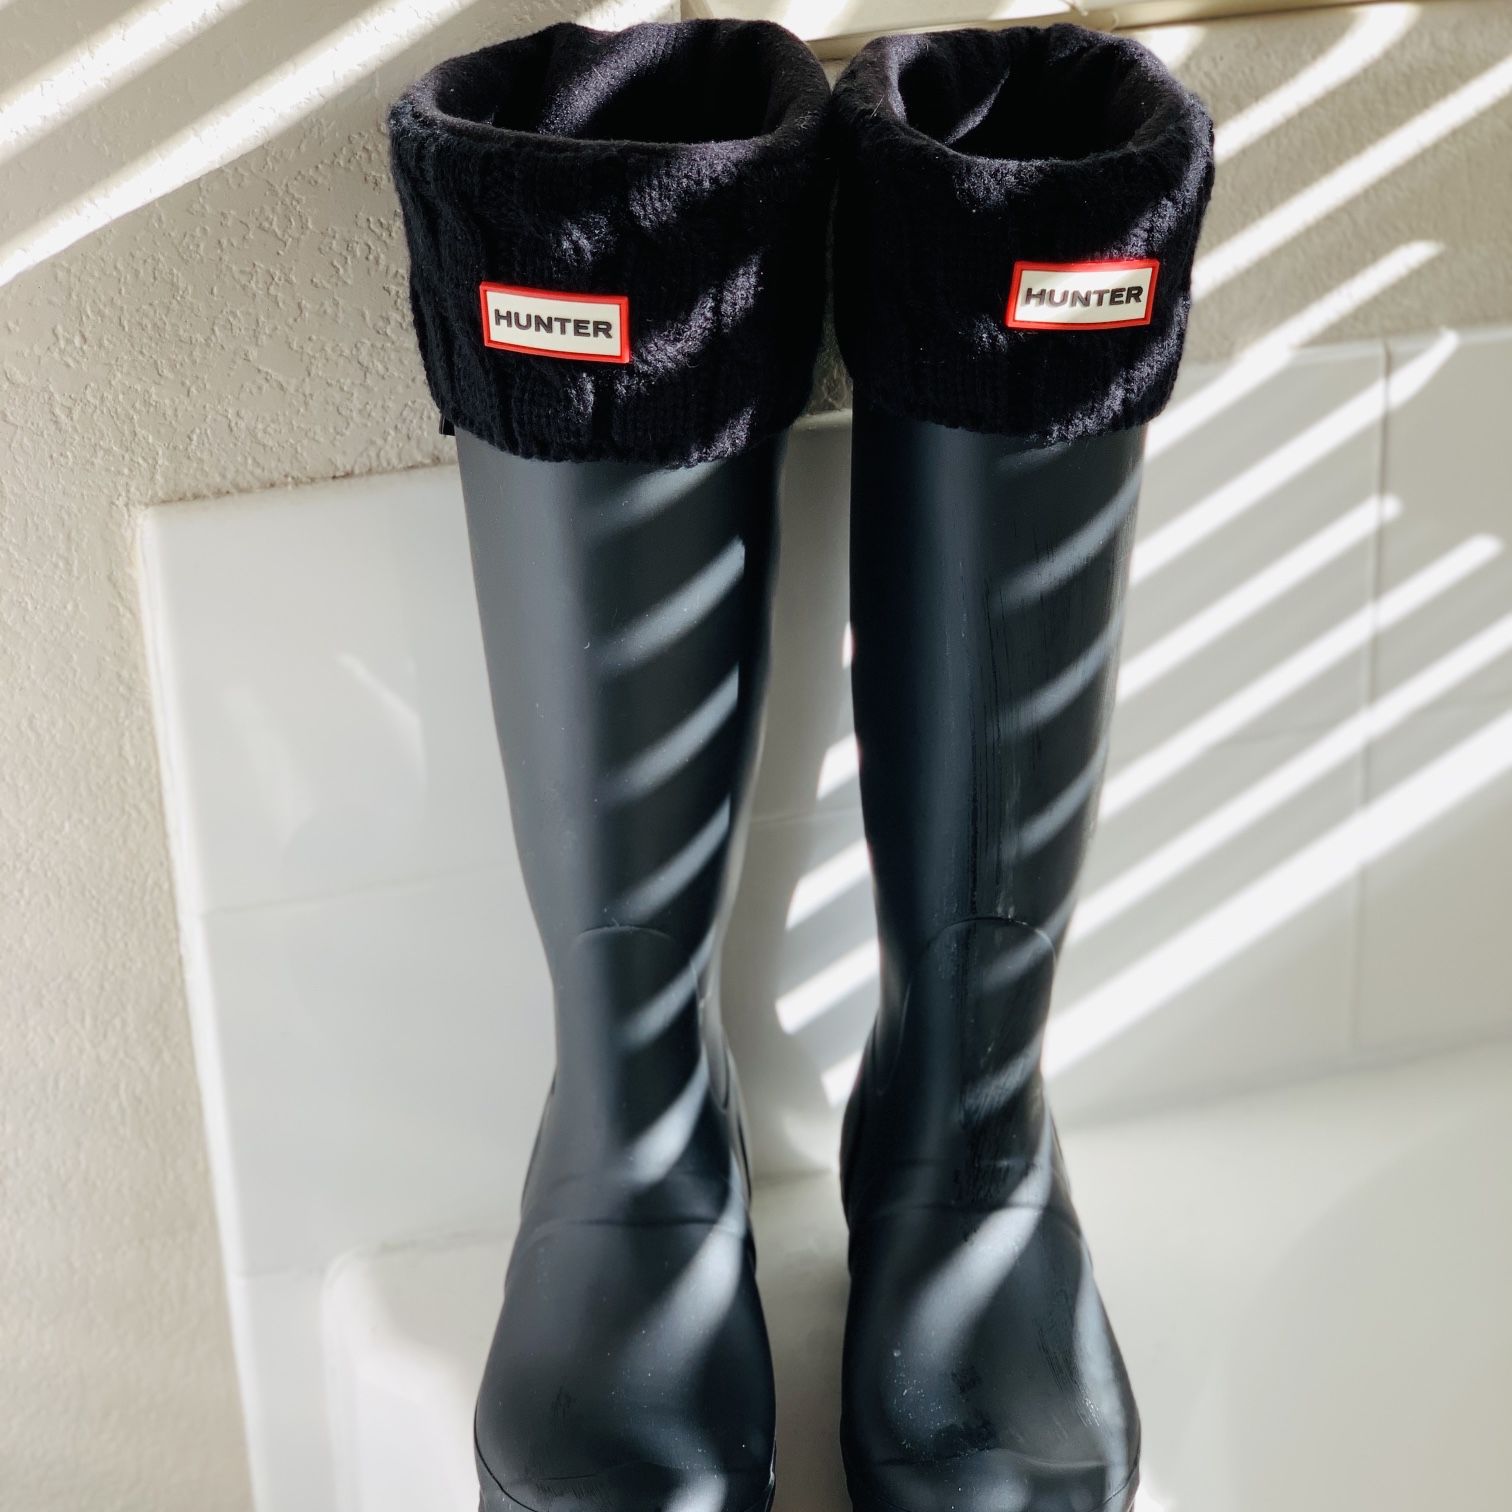 Hunter Rain Boots Size 9 AND expandable For Wide Calves